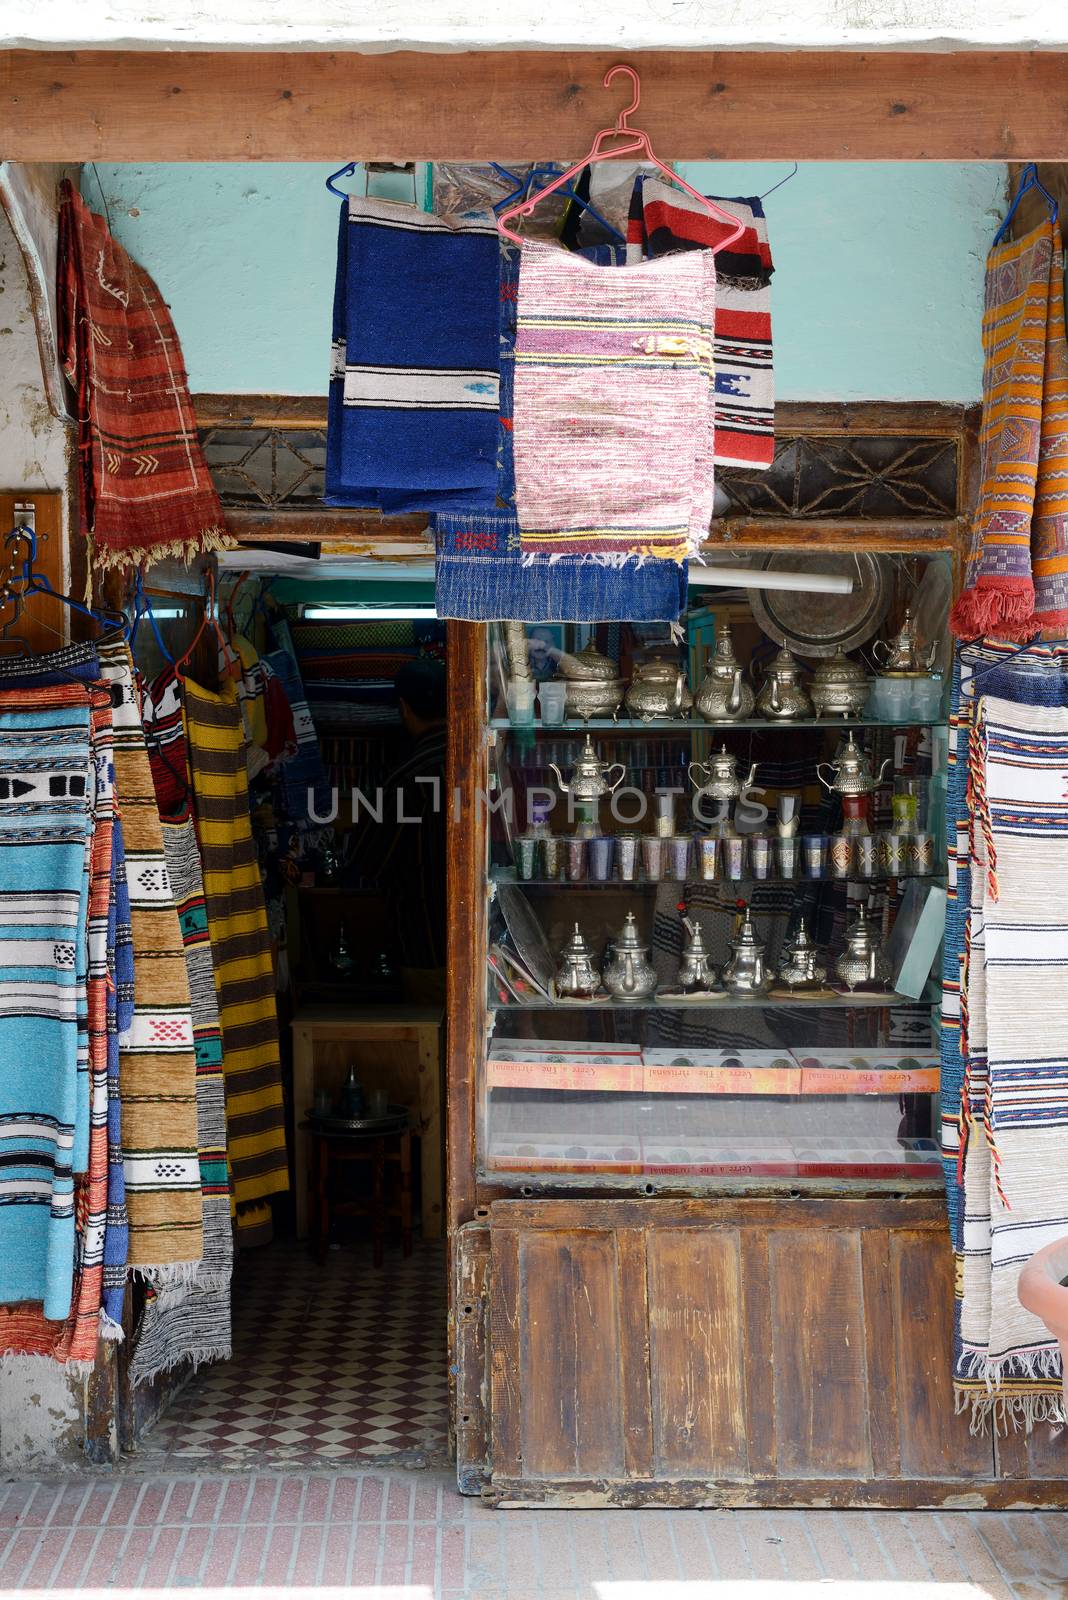 Morocco shop front with rugs and traditional tea pots and cups on display